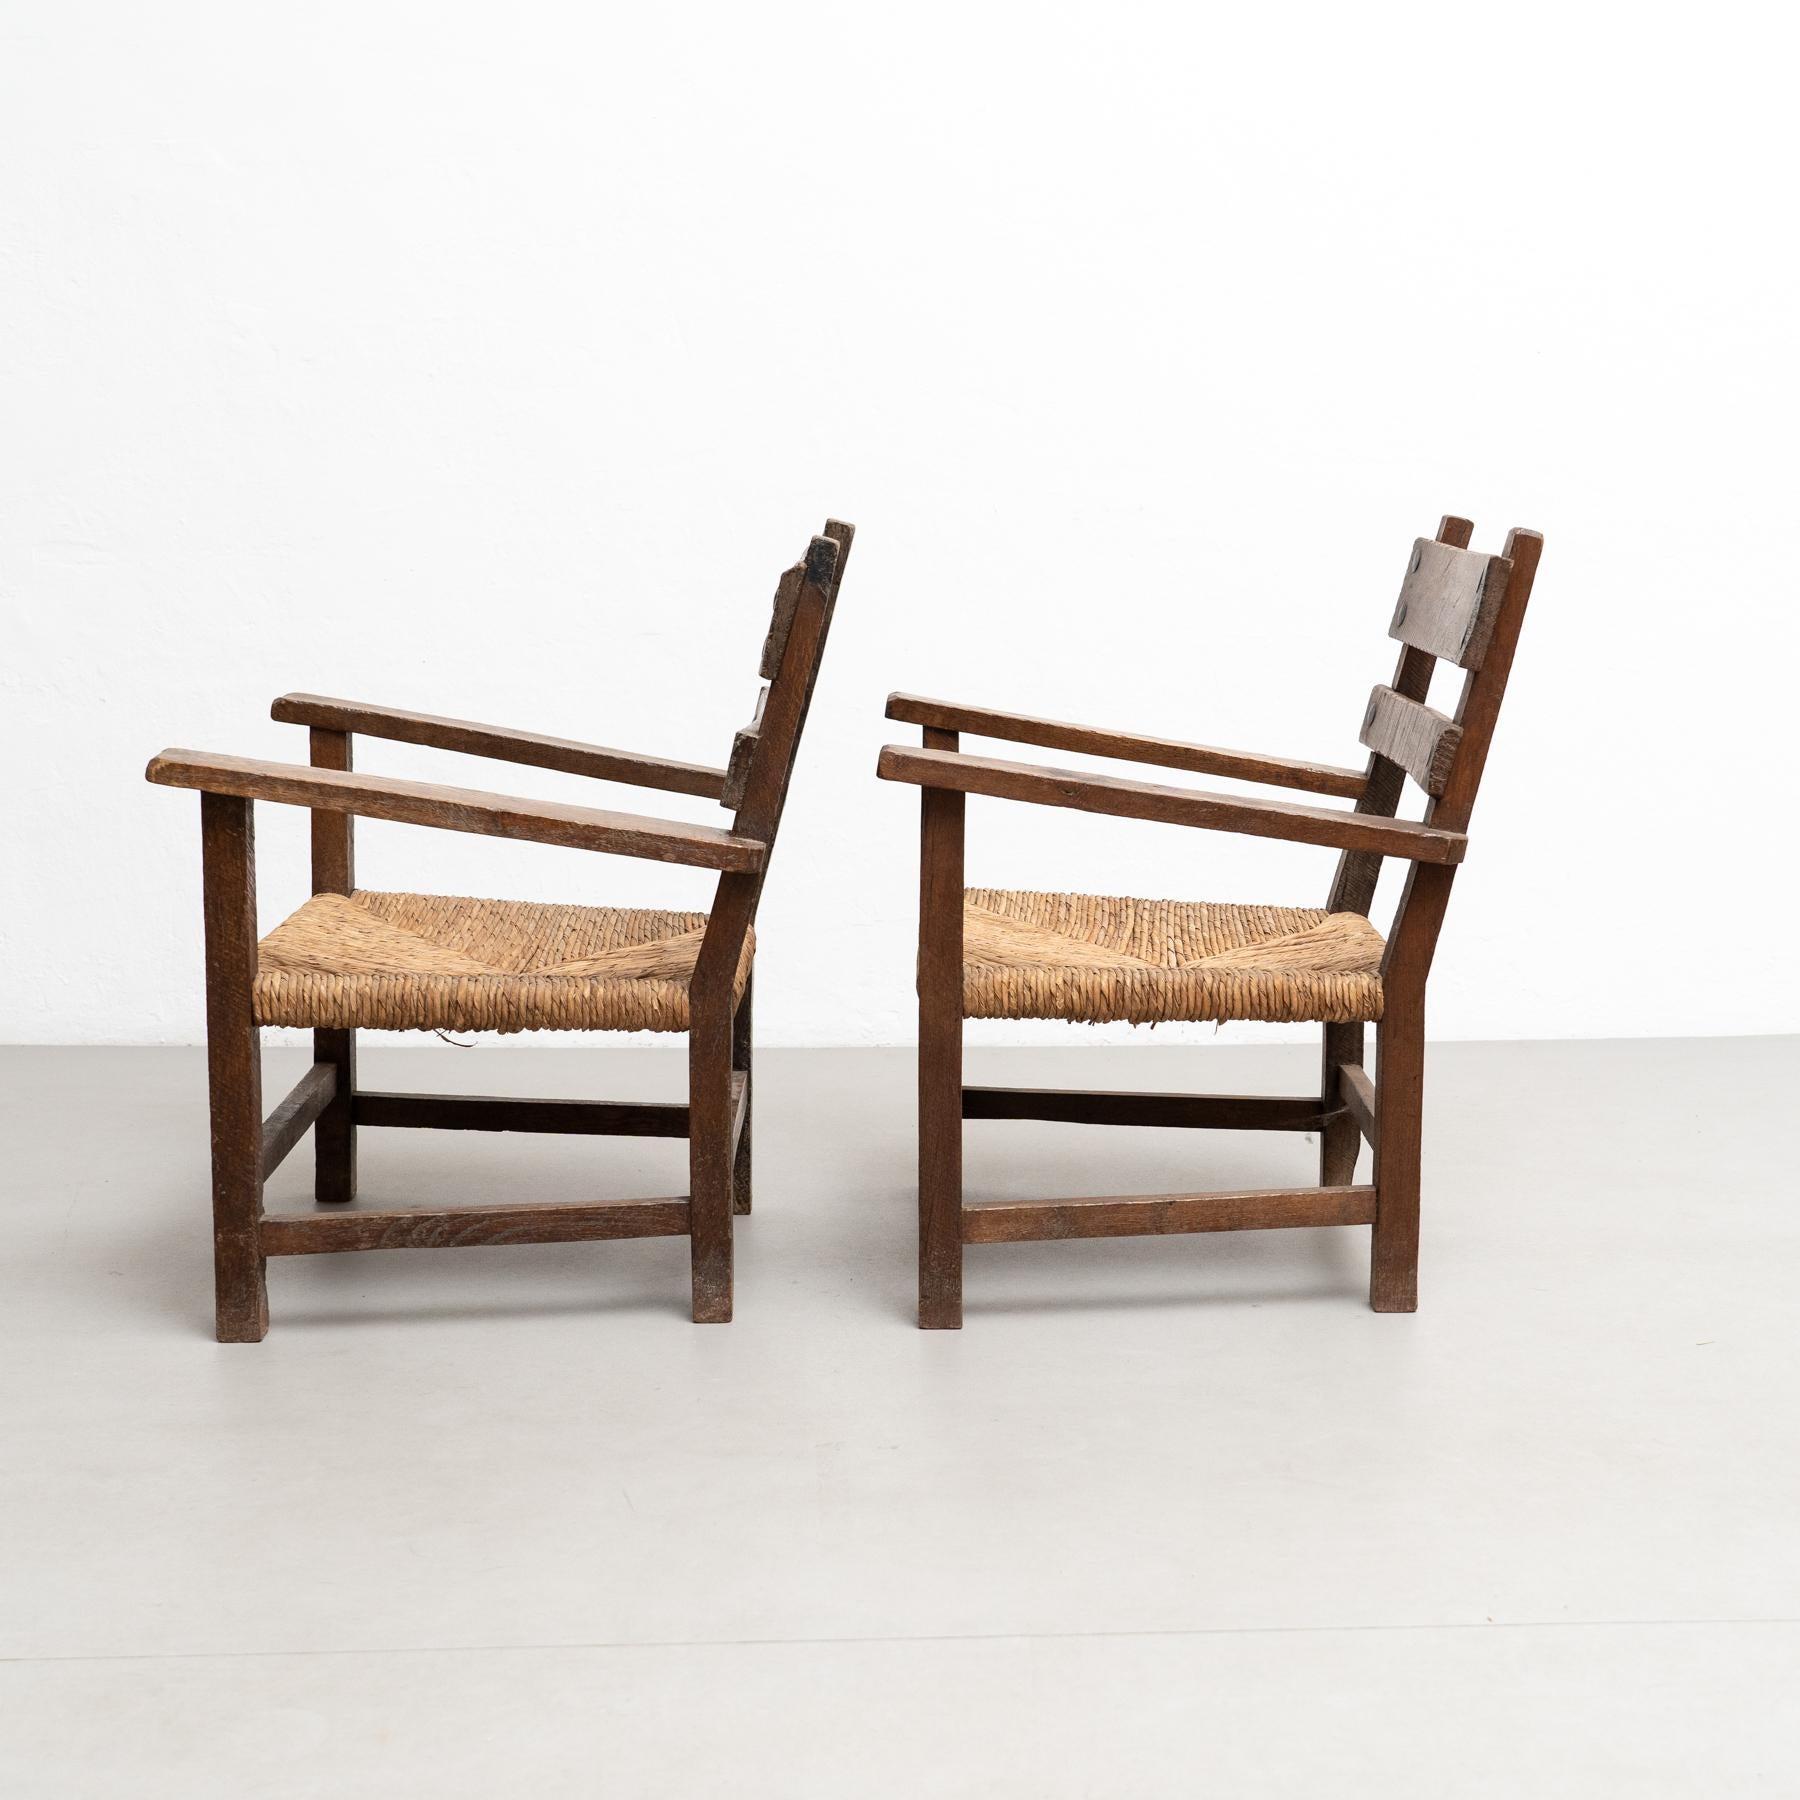 Set of Two Rustic Early 20th Century Armchairs in Solid Wood and Rattan In Good Condition For Sale In Barcelona, Barcelona